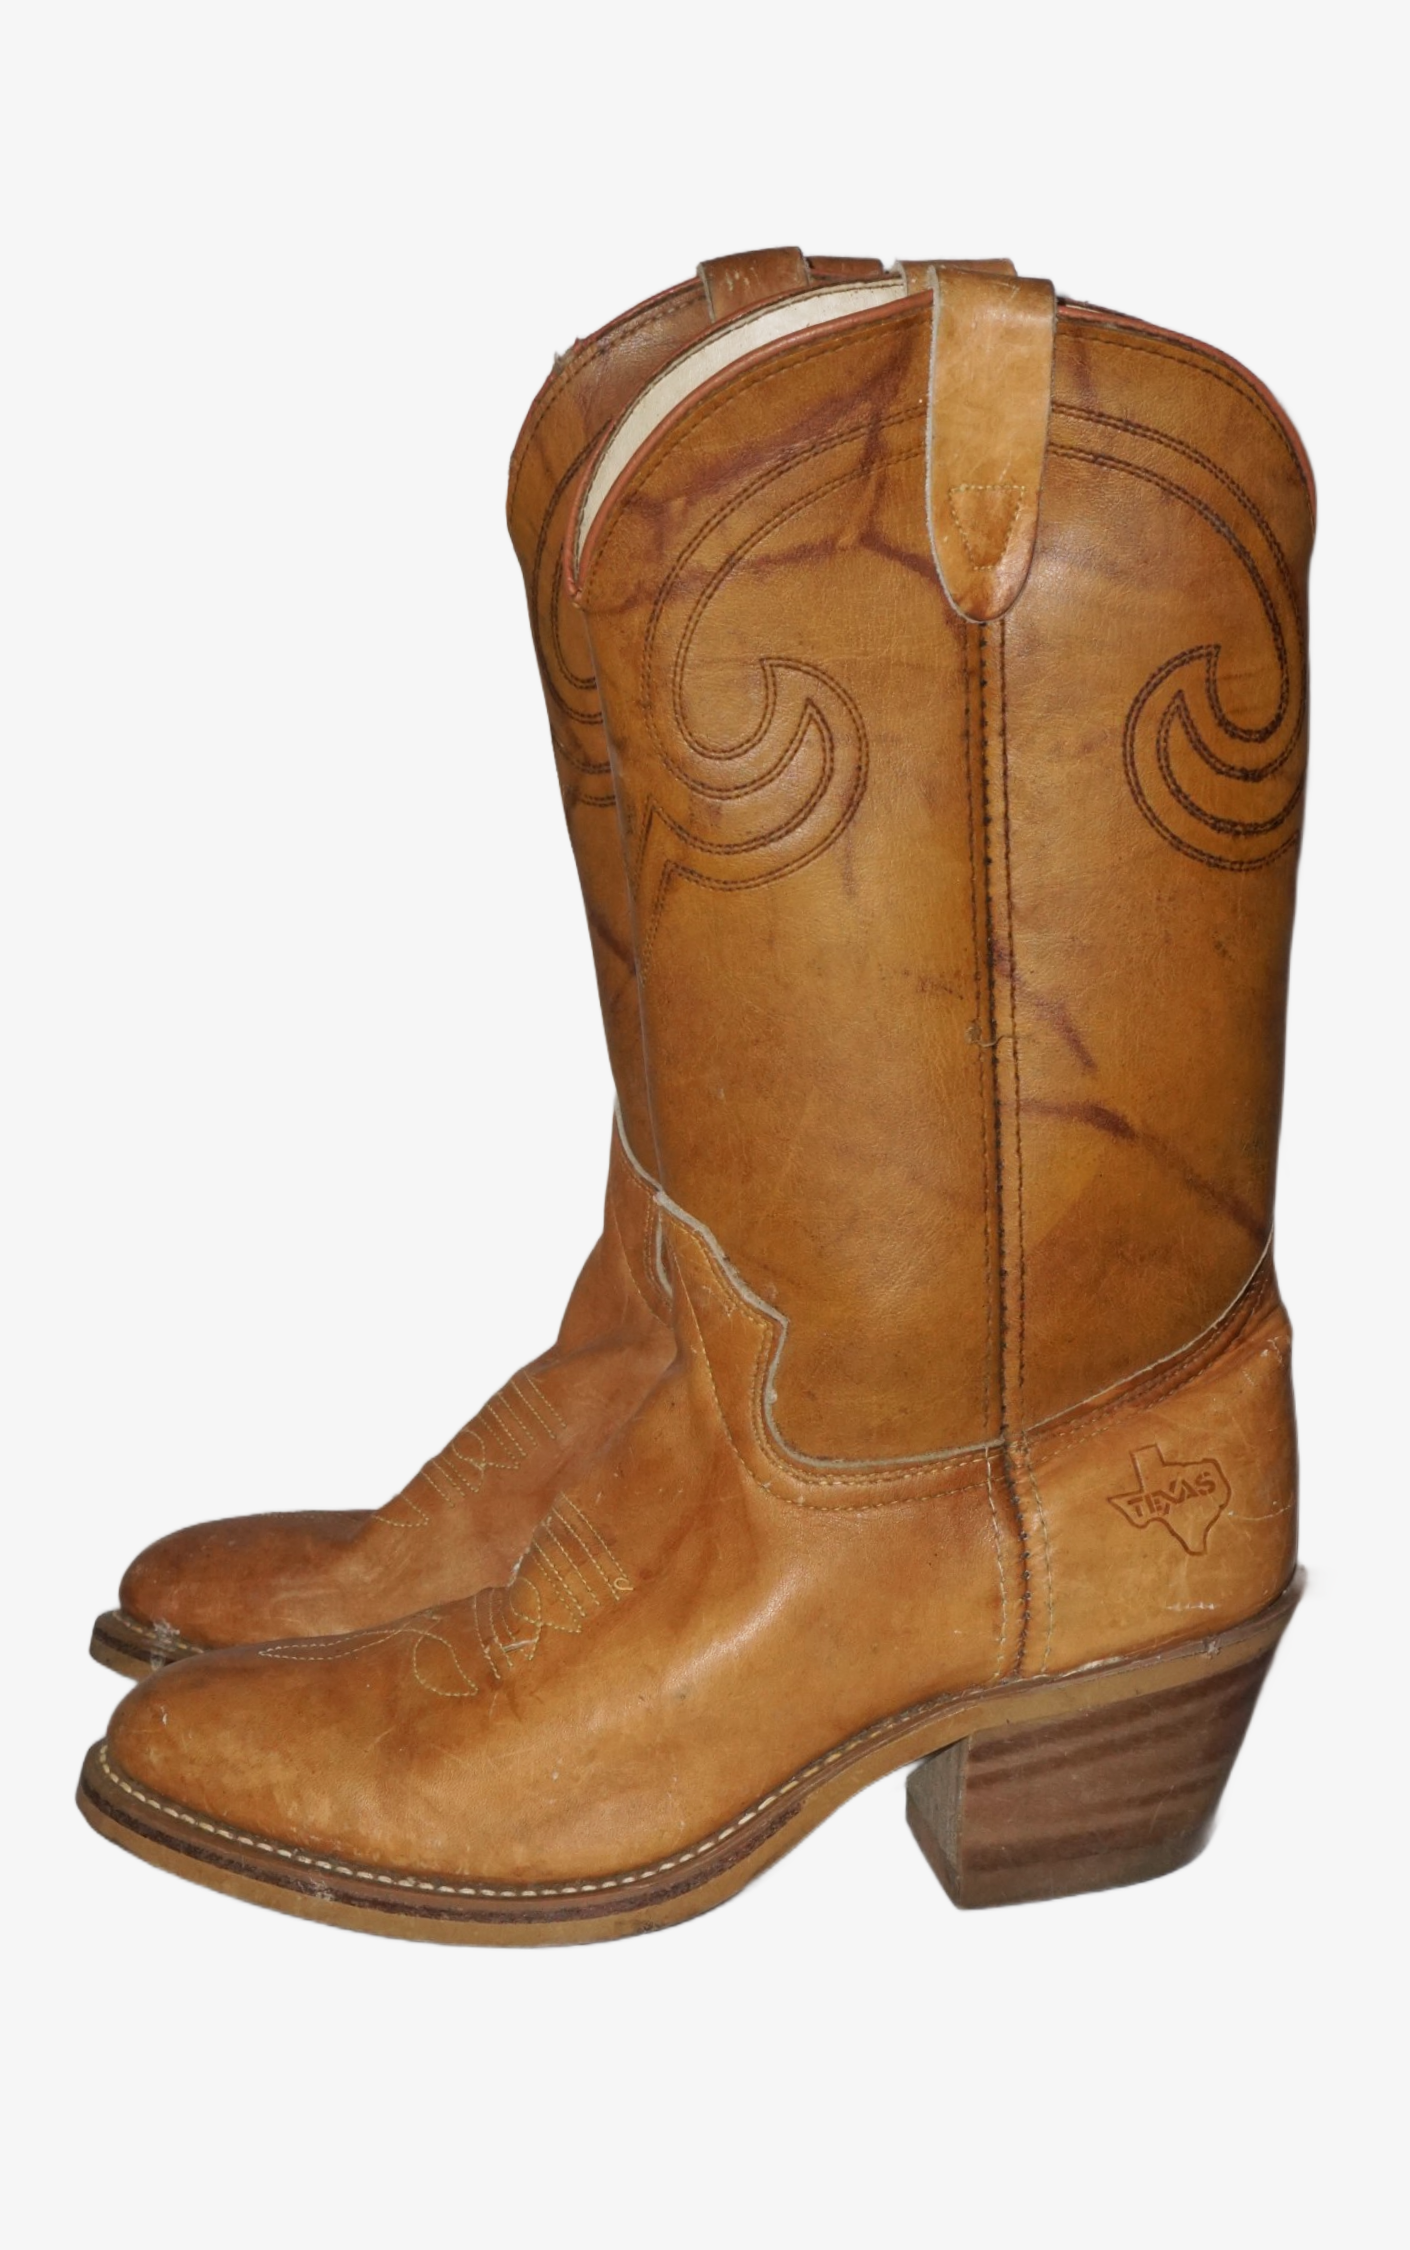 VINTAGE Texas Camel Brown Leather Western Cowboy Boots US 8.5 resellum